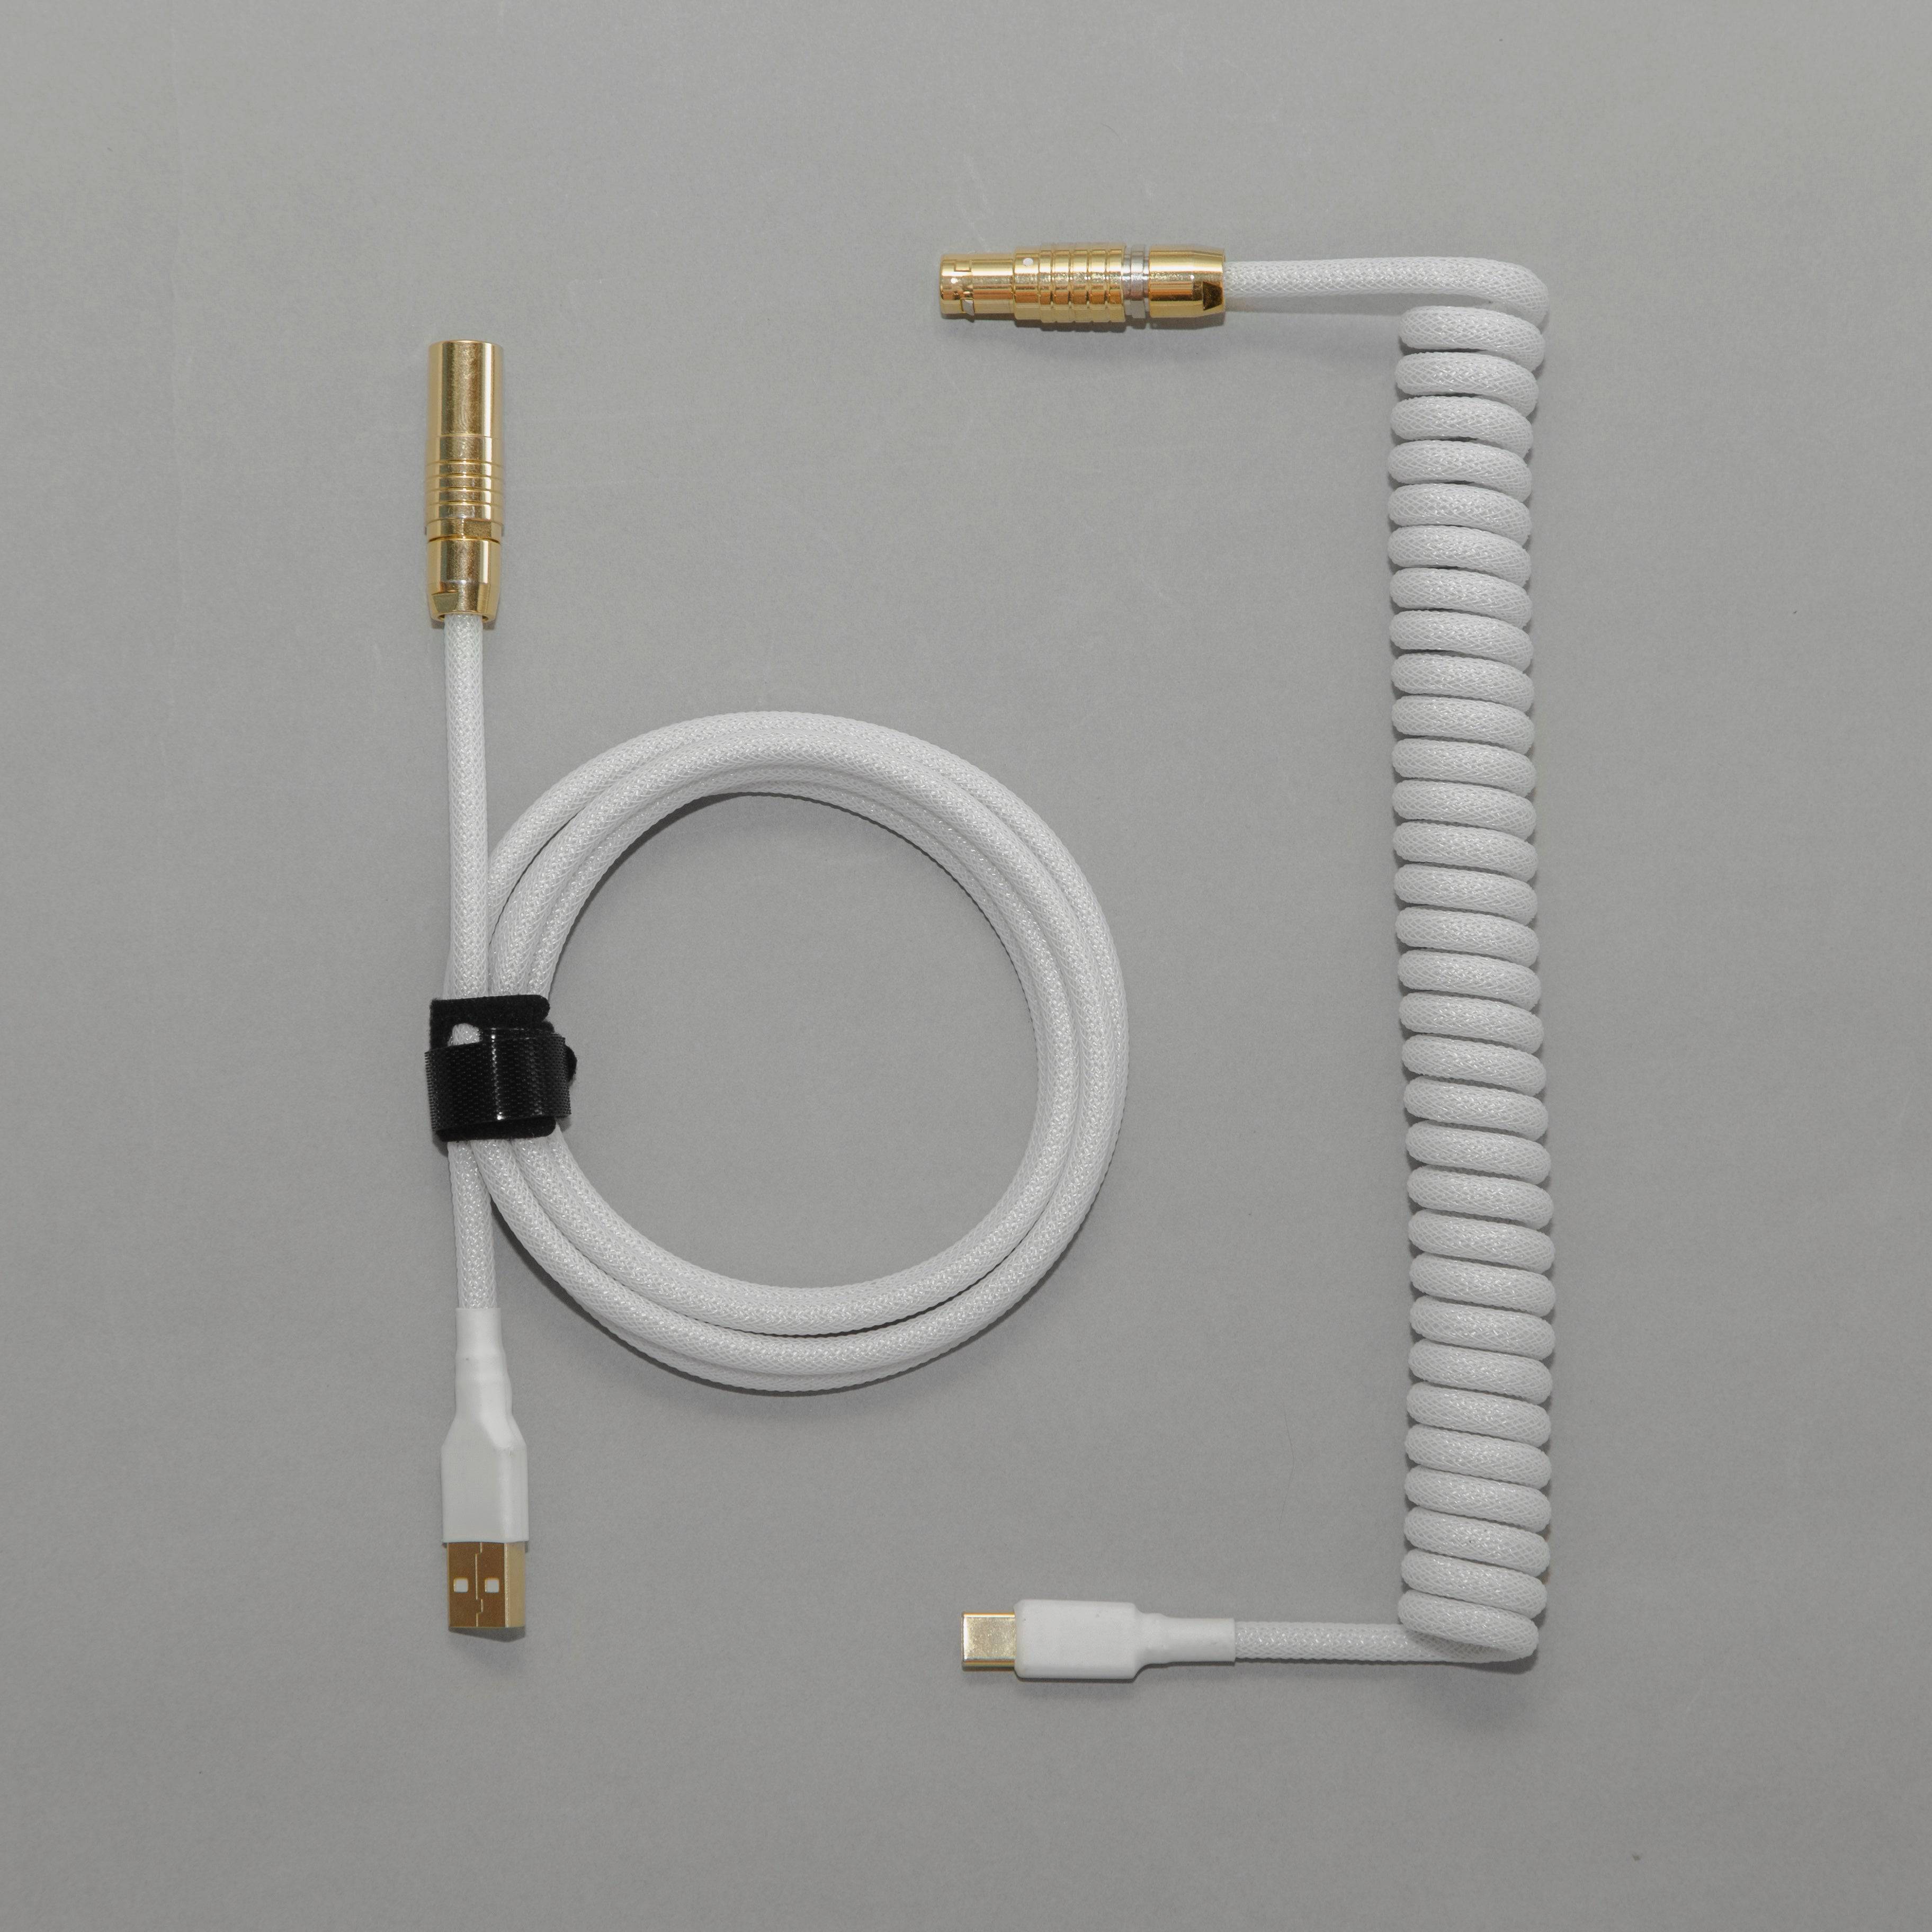 Viendi 8L White & Gold Luxury Cable proxied by KeebsForAll